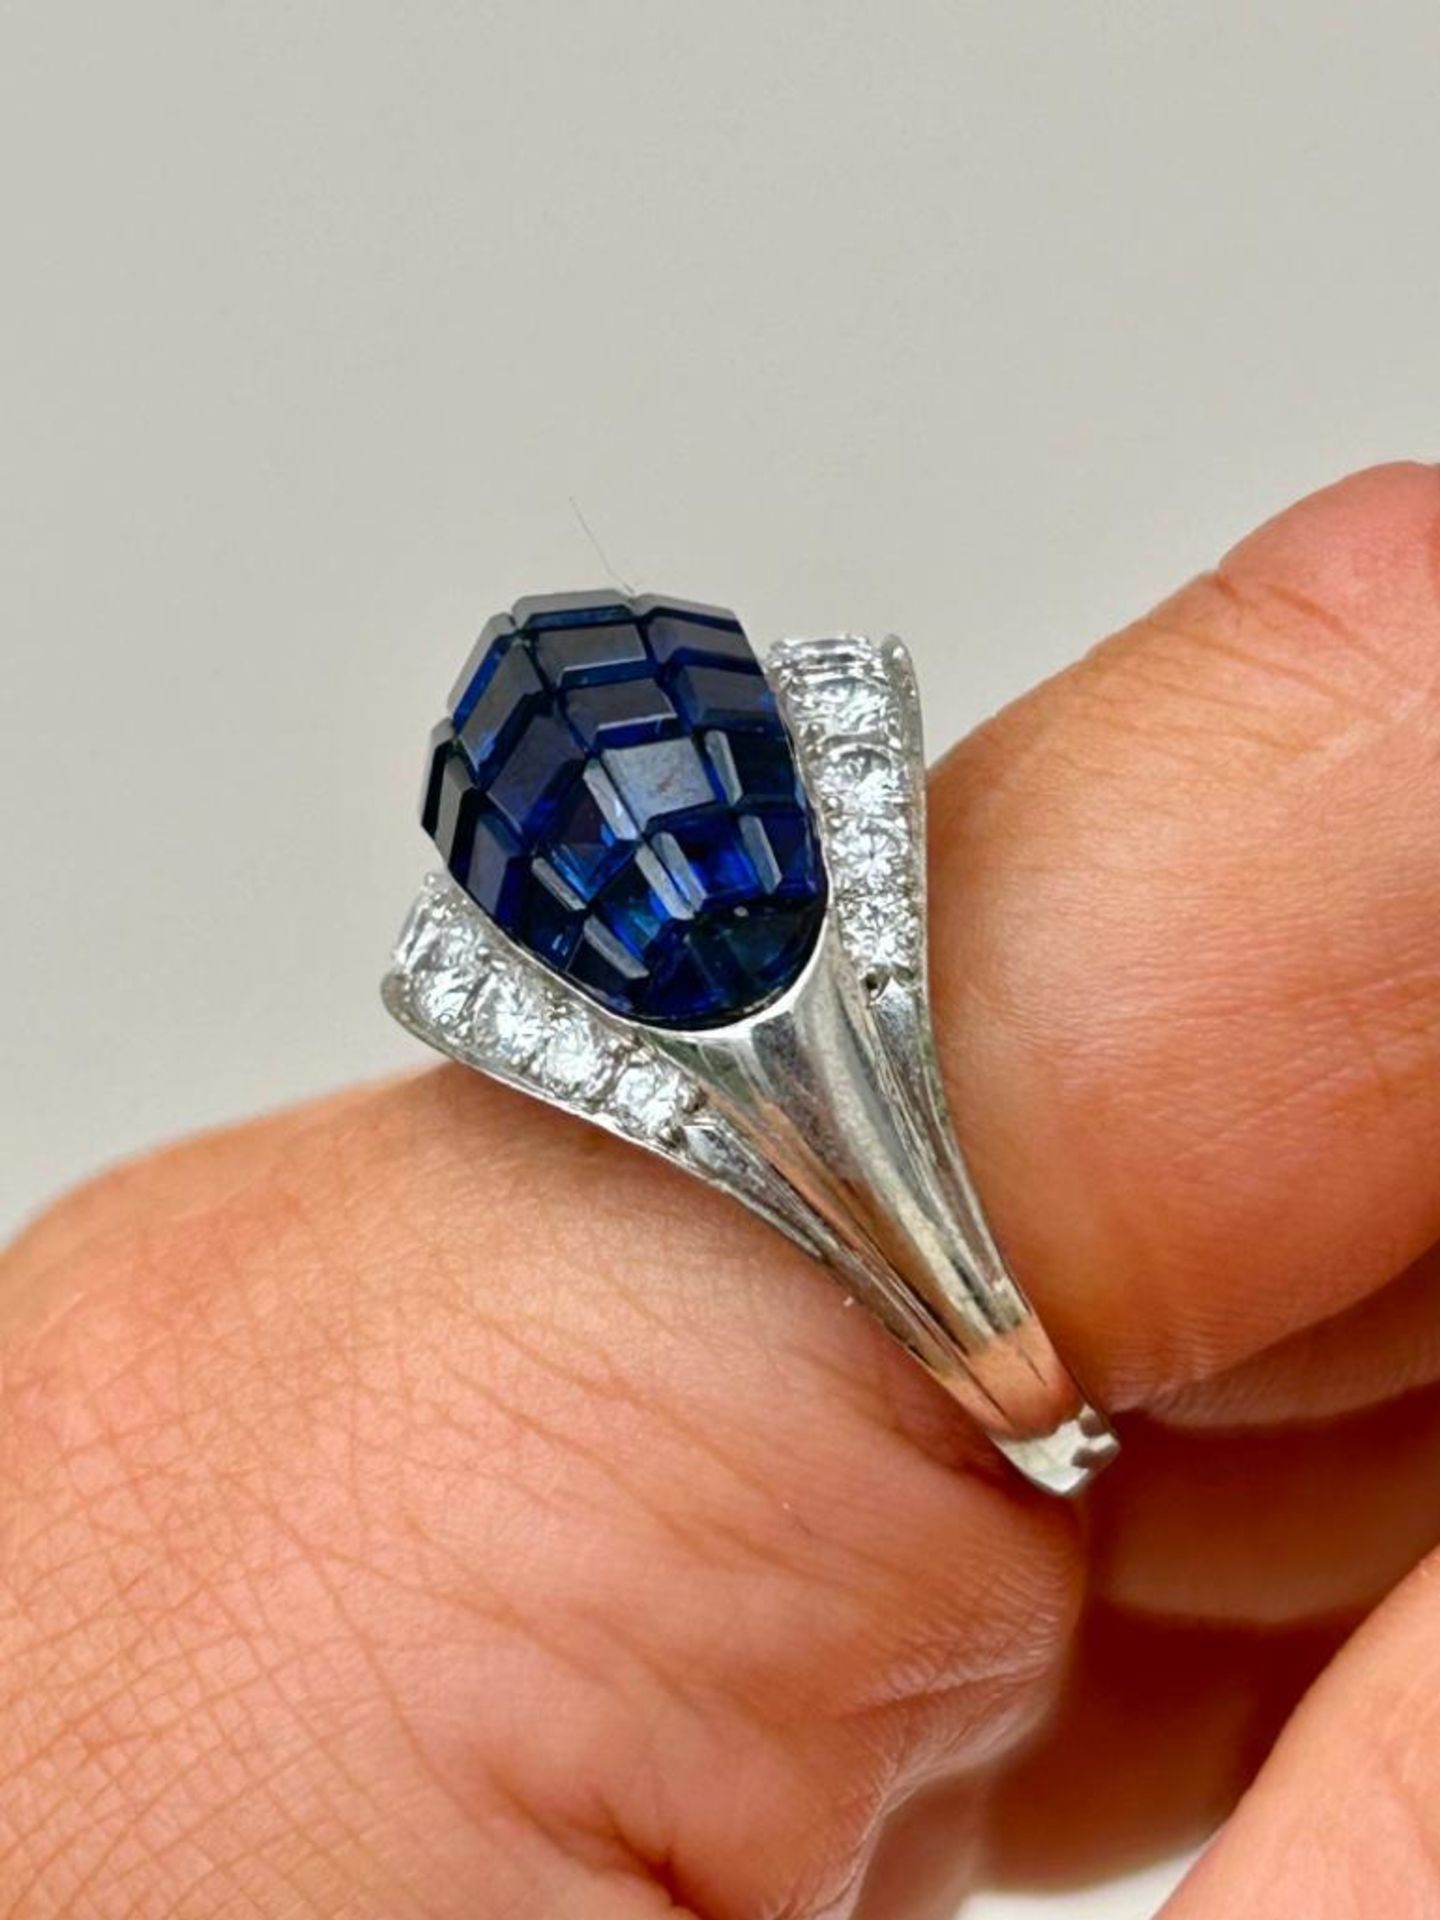 1940s Sapphire and Diamond “Schilling” Cocktail Ring in 18ct White Gold - Image 4 of 9